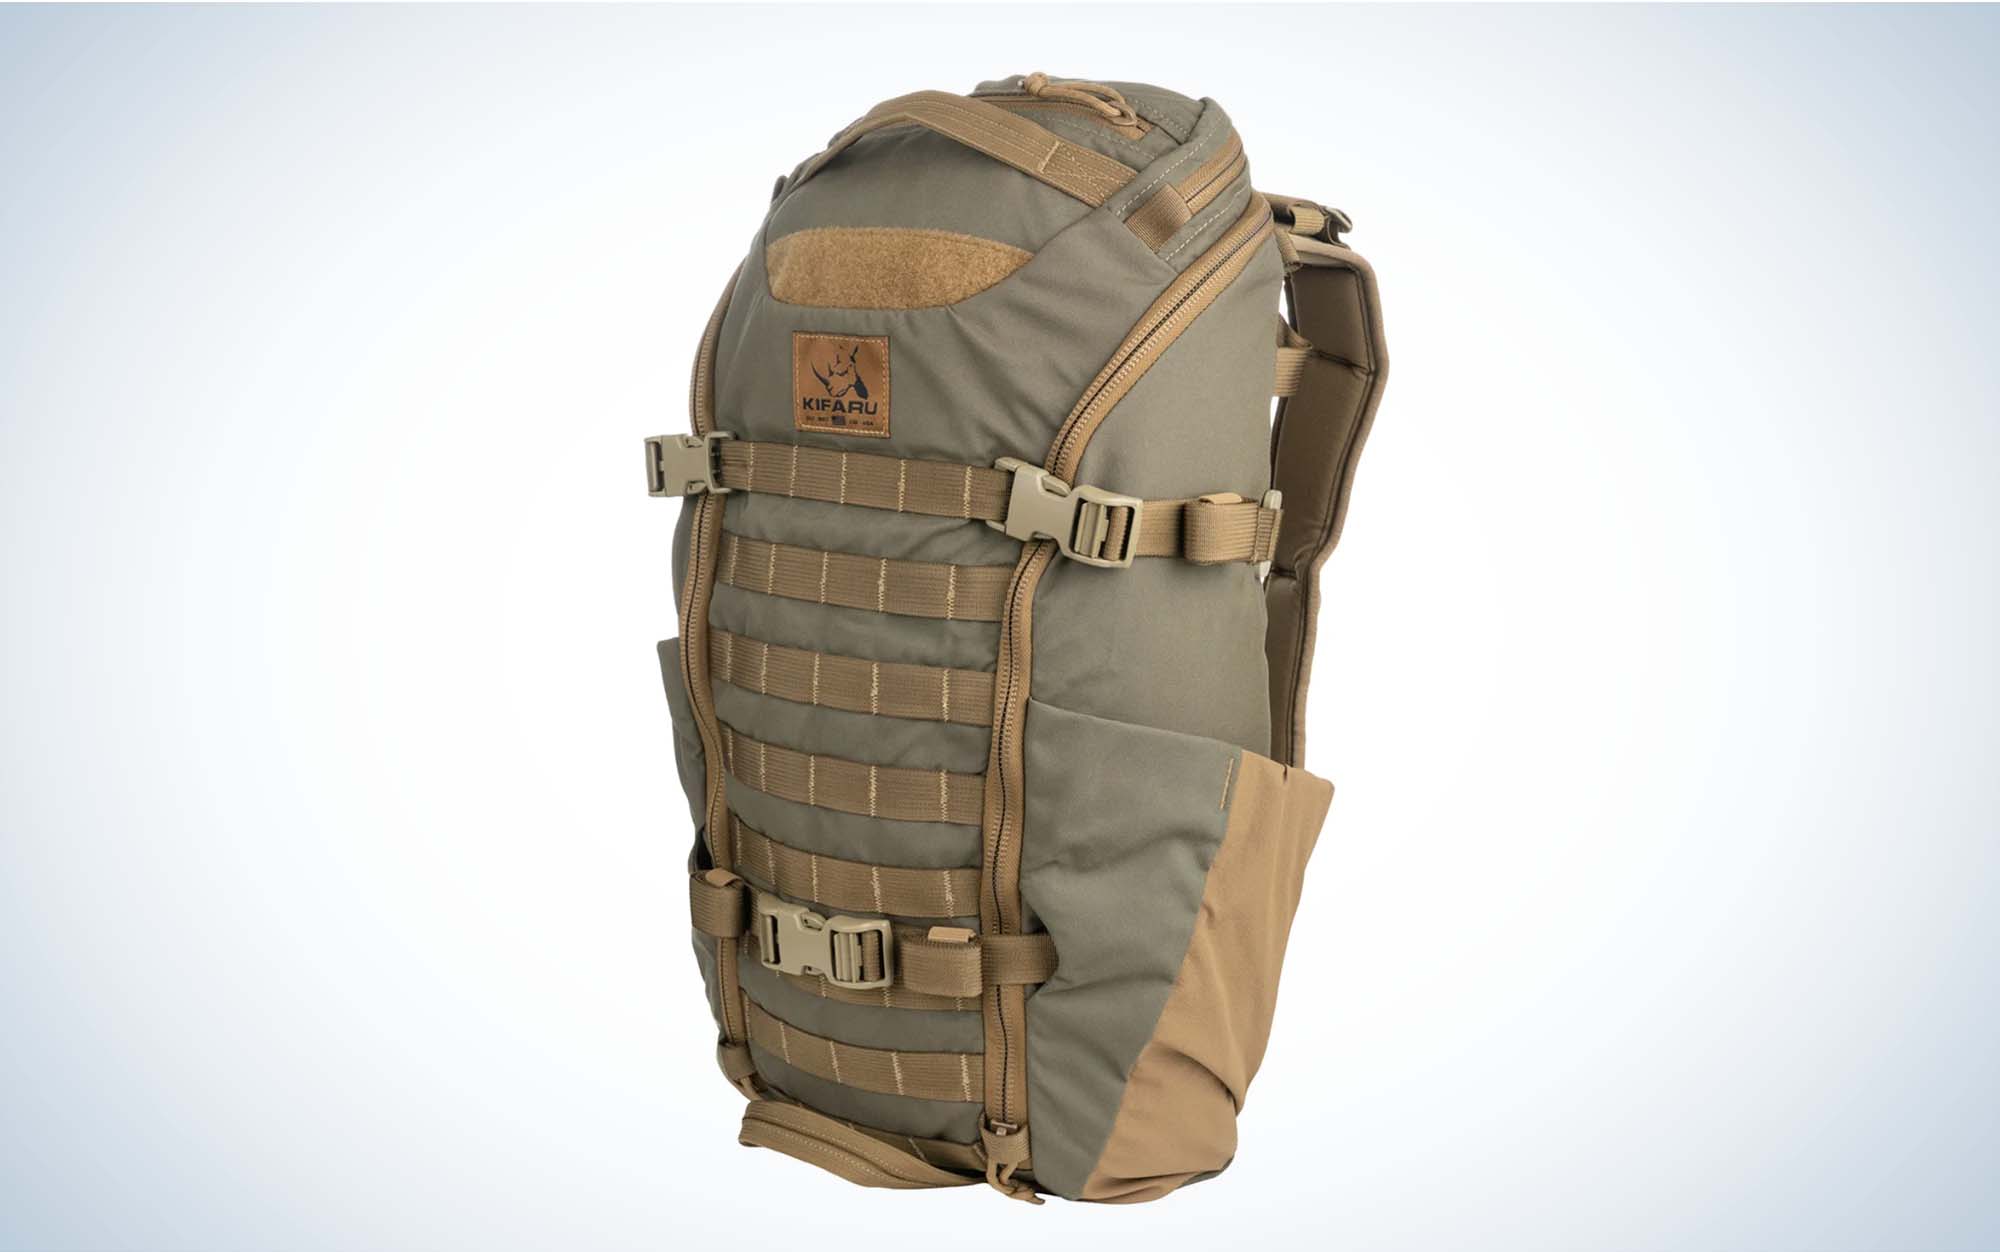 The best hunting backpack